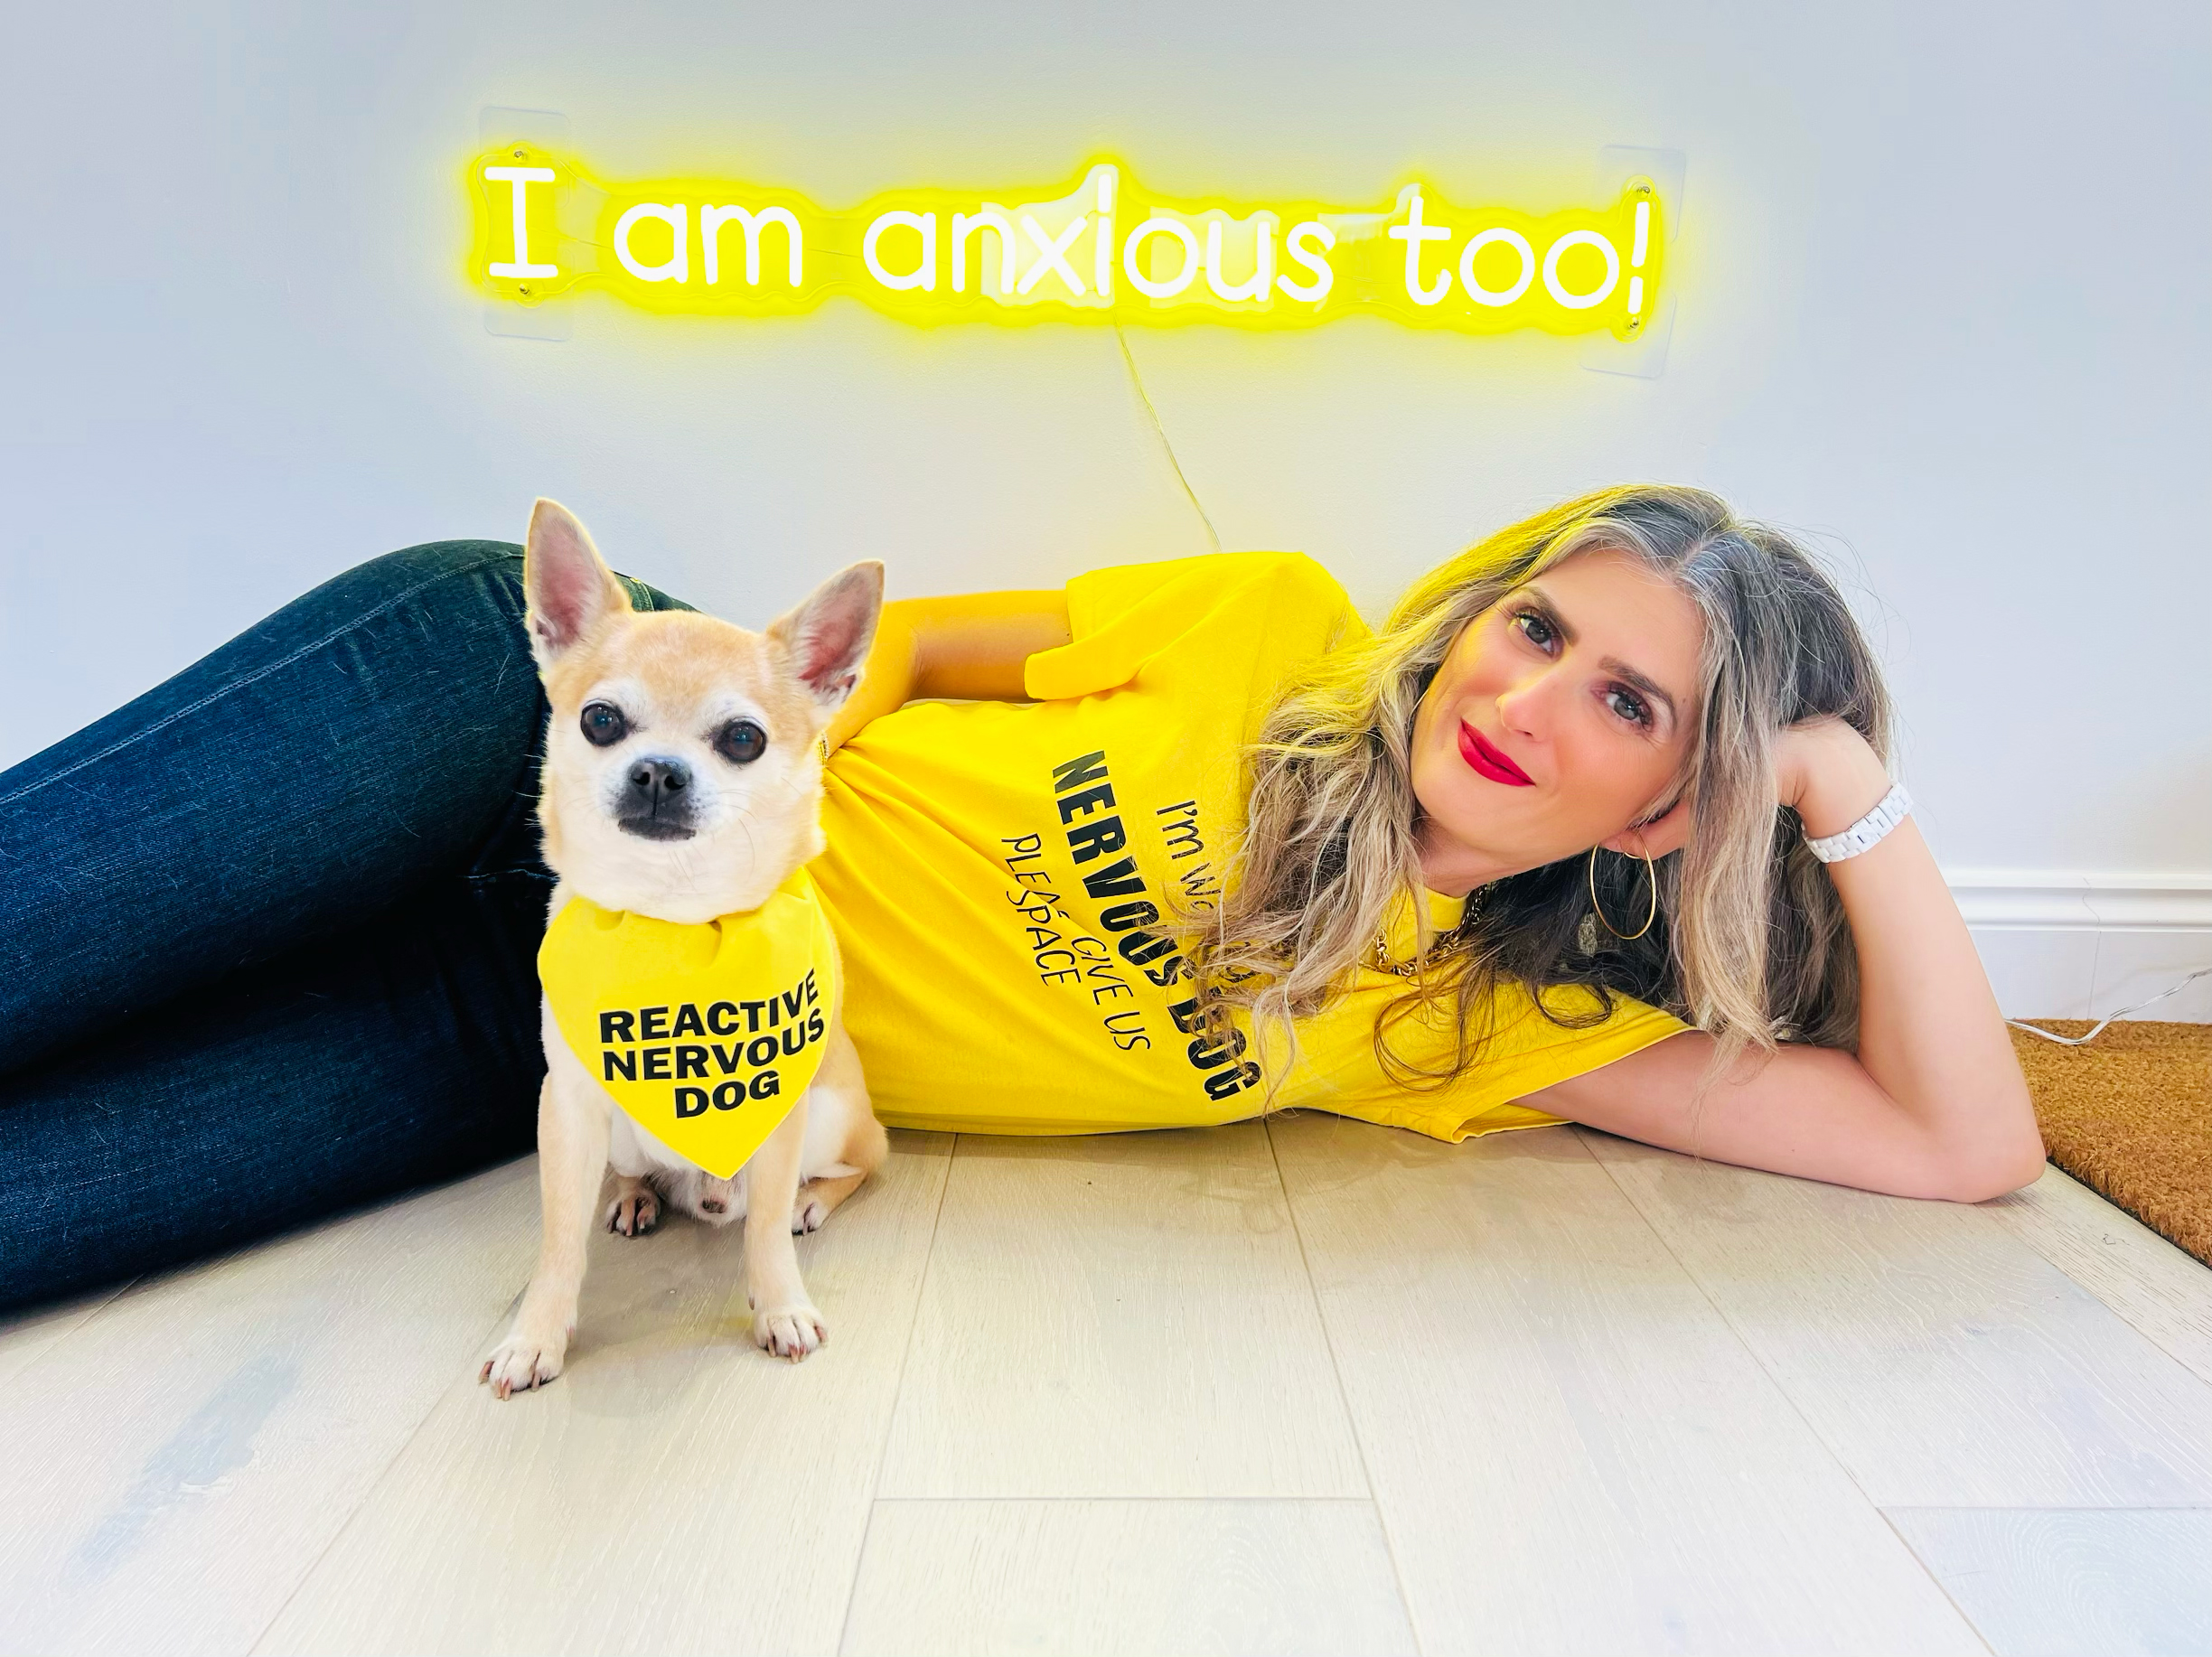 Chilliwawa breaks the silence on canine anxiety: “I am anxious too” a four-legged social media campaign!